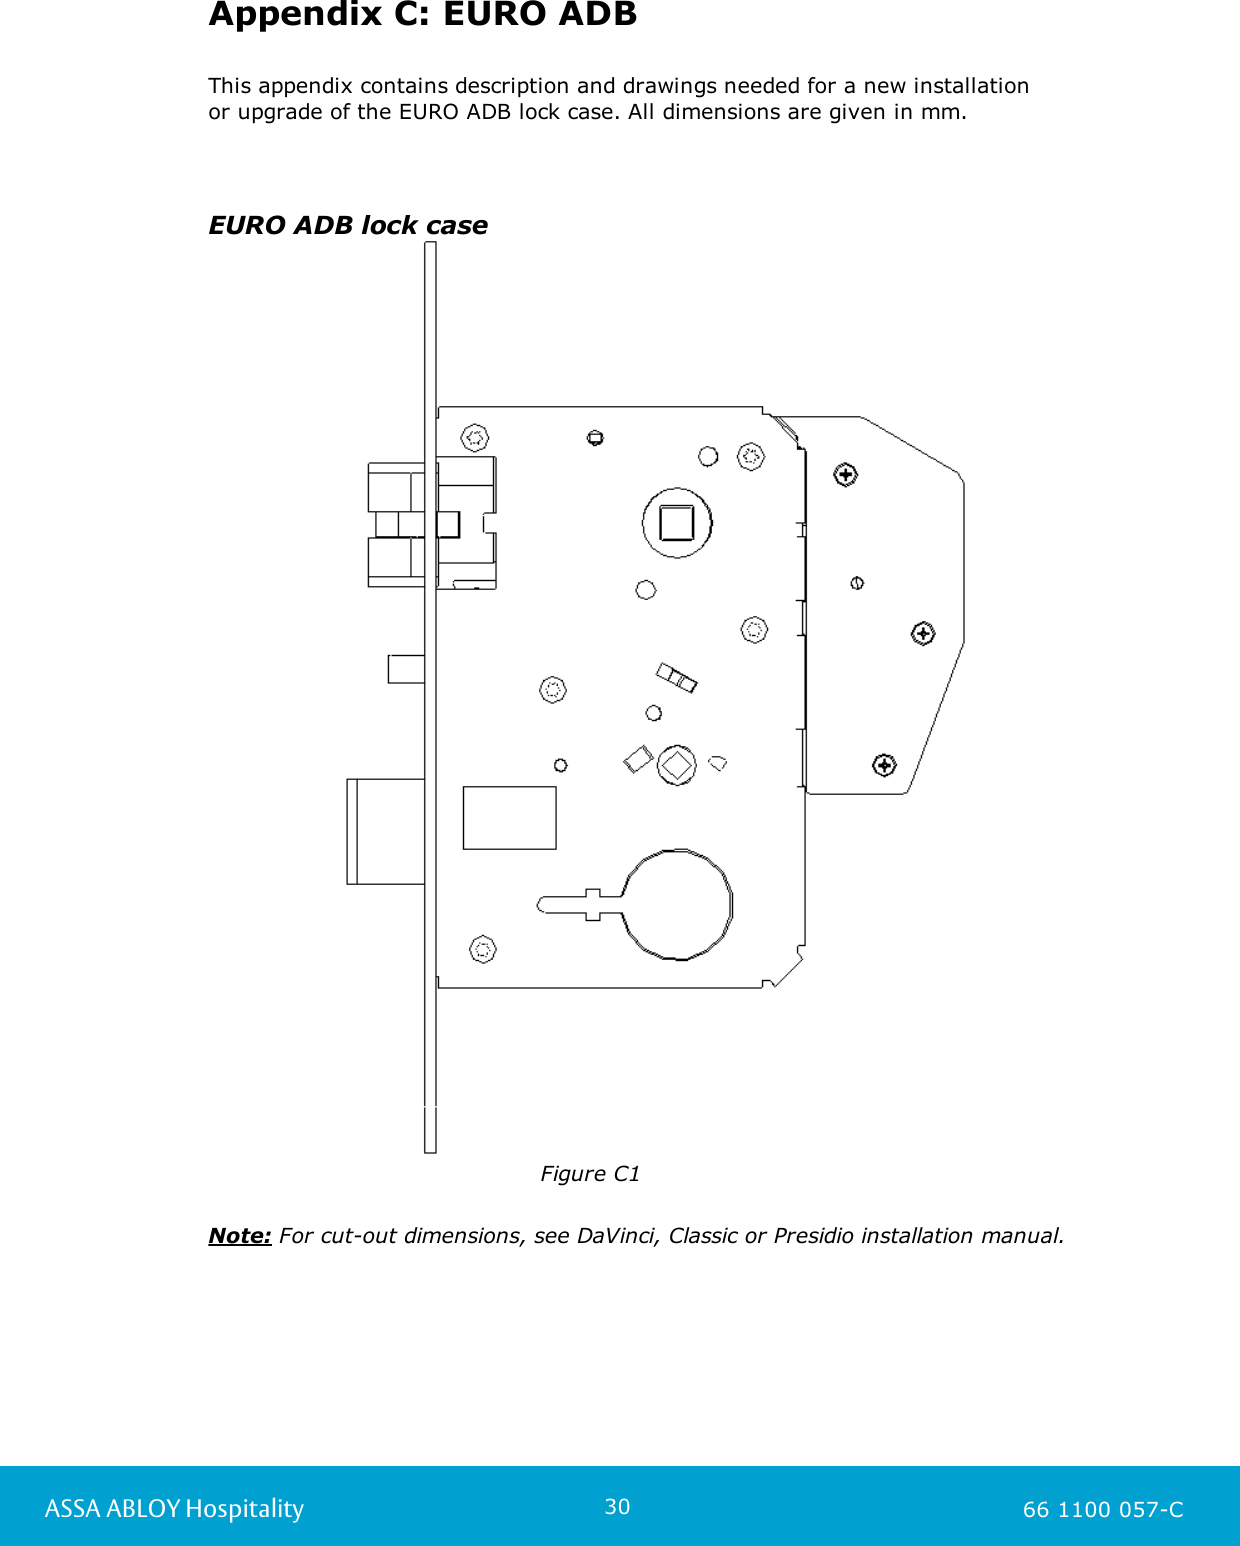 30ASSA ABLOY Hospitality 66 1100 057-CAppendix C: EURO ADBThis appendix contains description and drawings needed for a new installation or upgrade of the EURO ADB lock case. All dimensions are given in mm.EURO ADB lock caseFigure C1Note: For cut-out dimensions, see DaVinci, Classic or Presidio installation manual. 